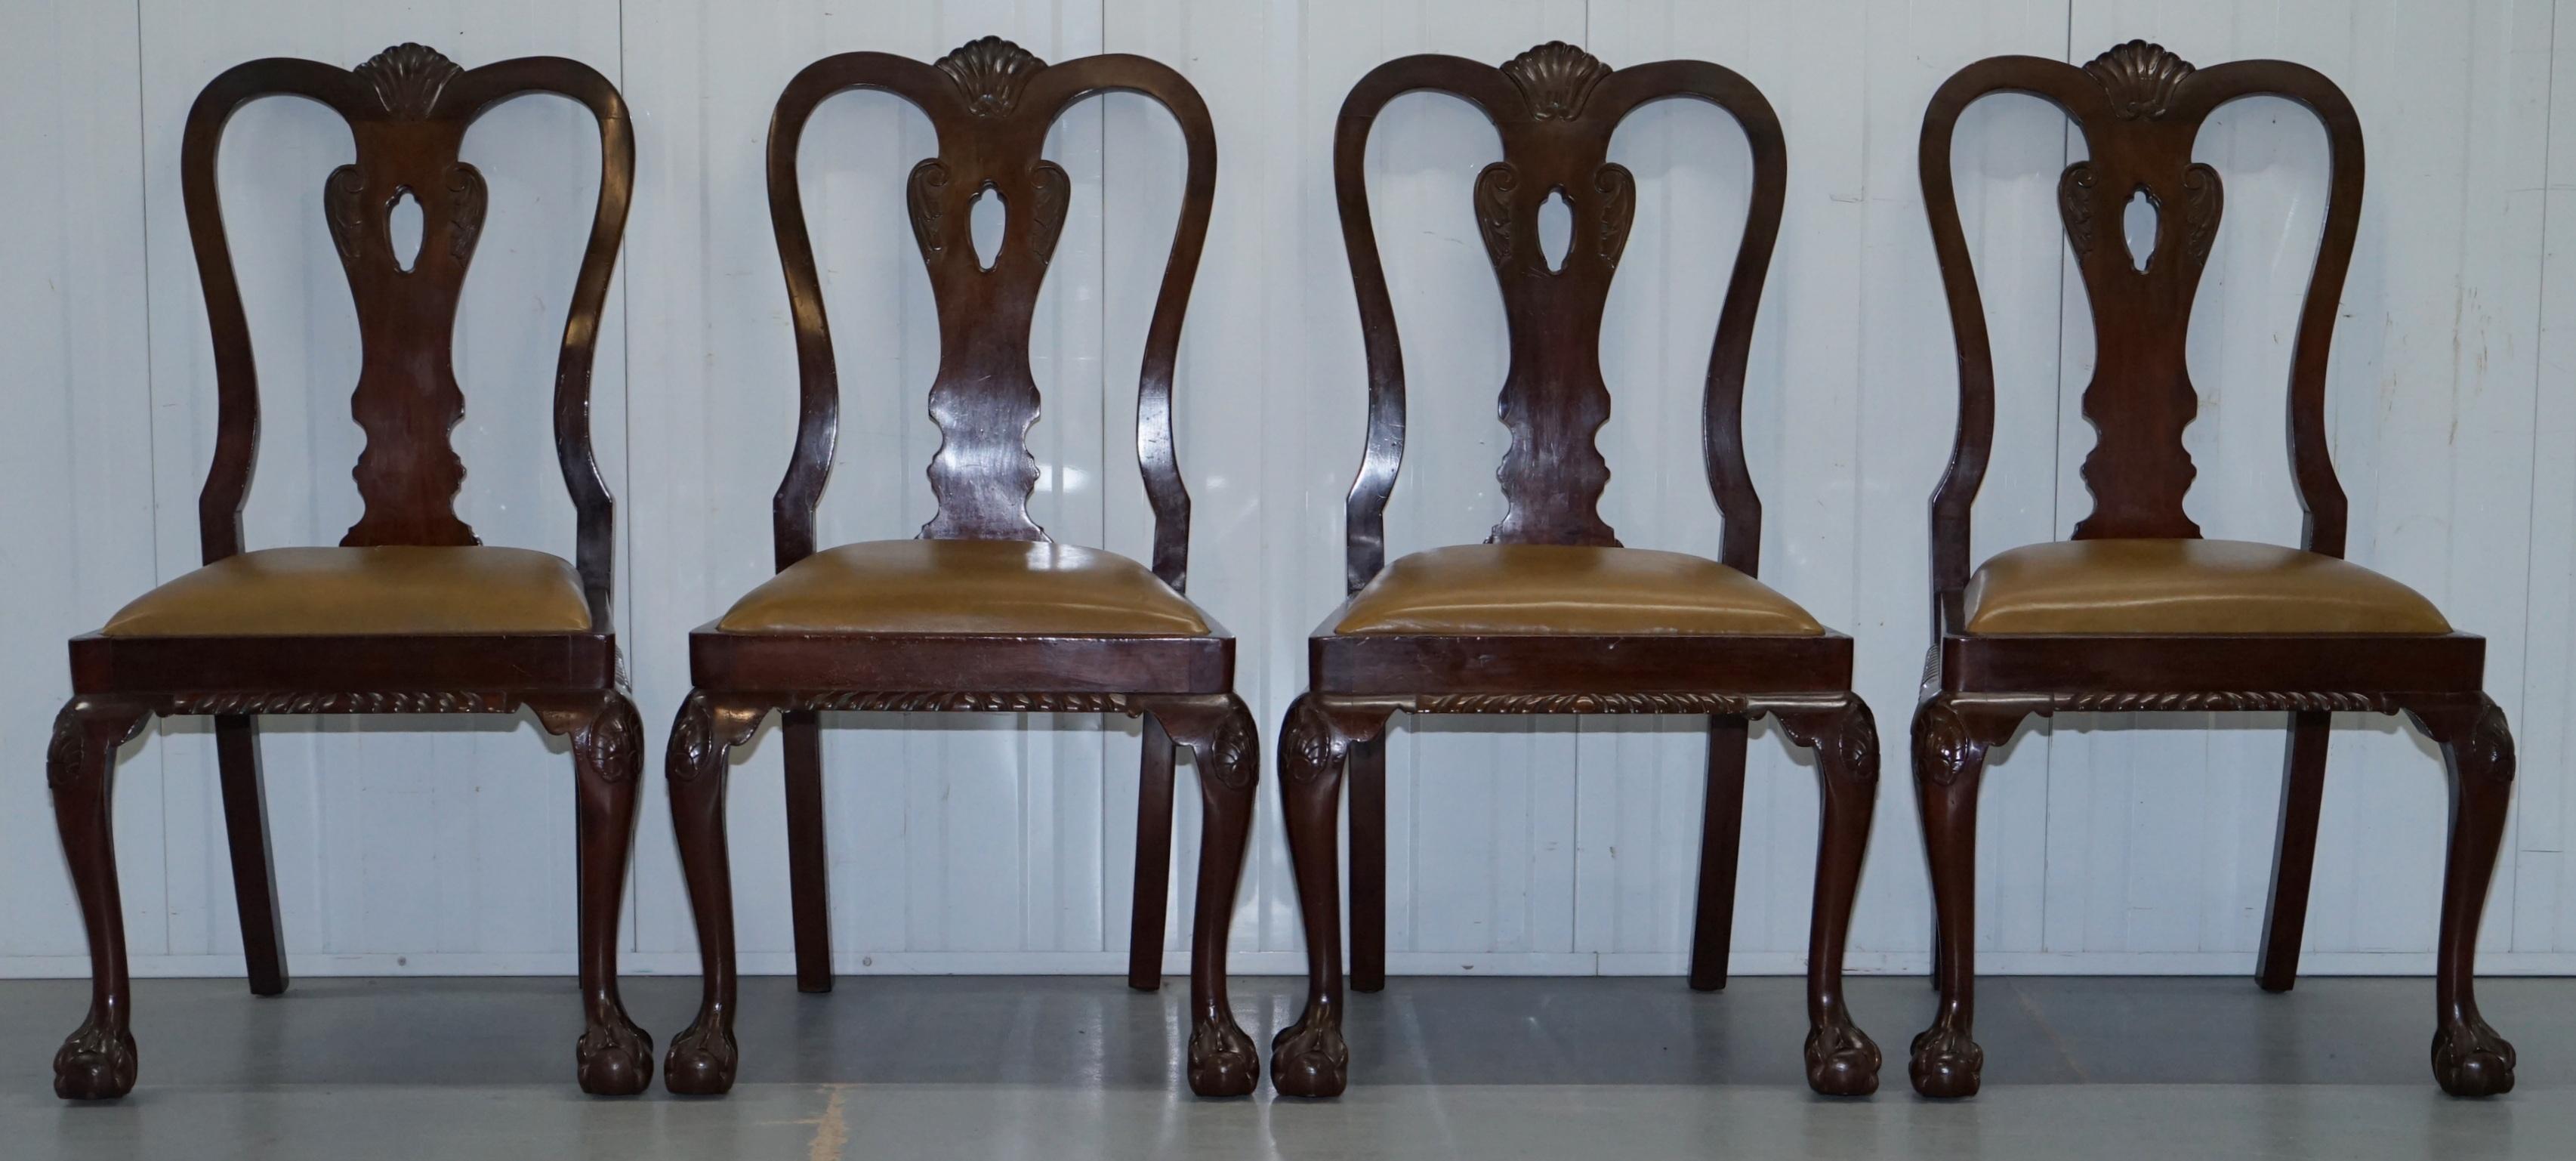 We are delighted to offer for sale this lovely set of early 20th century Tomas Chippendale style hand carved mahogany with leather seat pad dining chairs 

A quintessentially English set of chairs, these are good solid heavy handmade mahogany